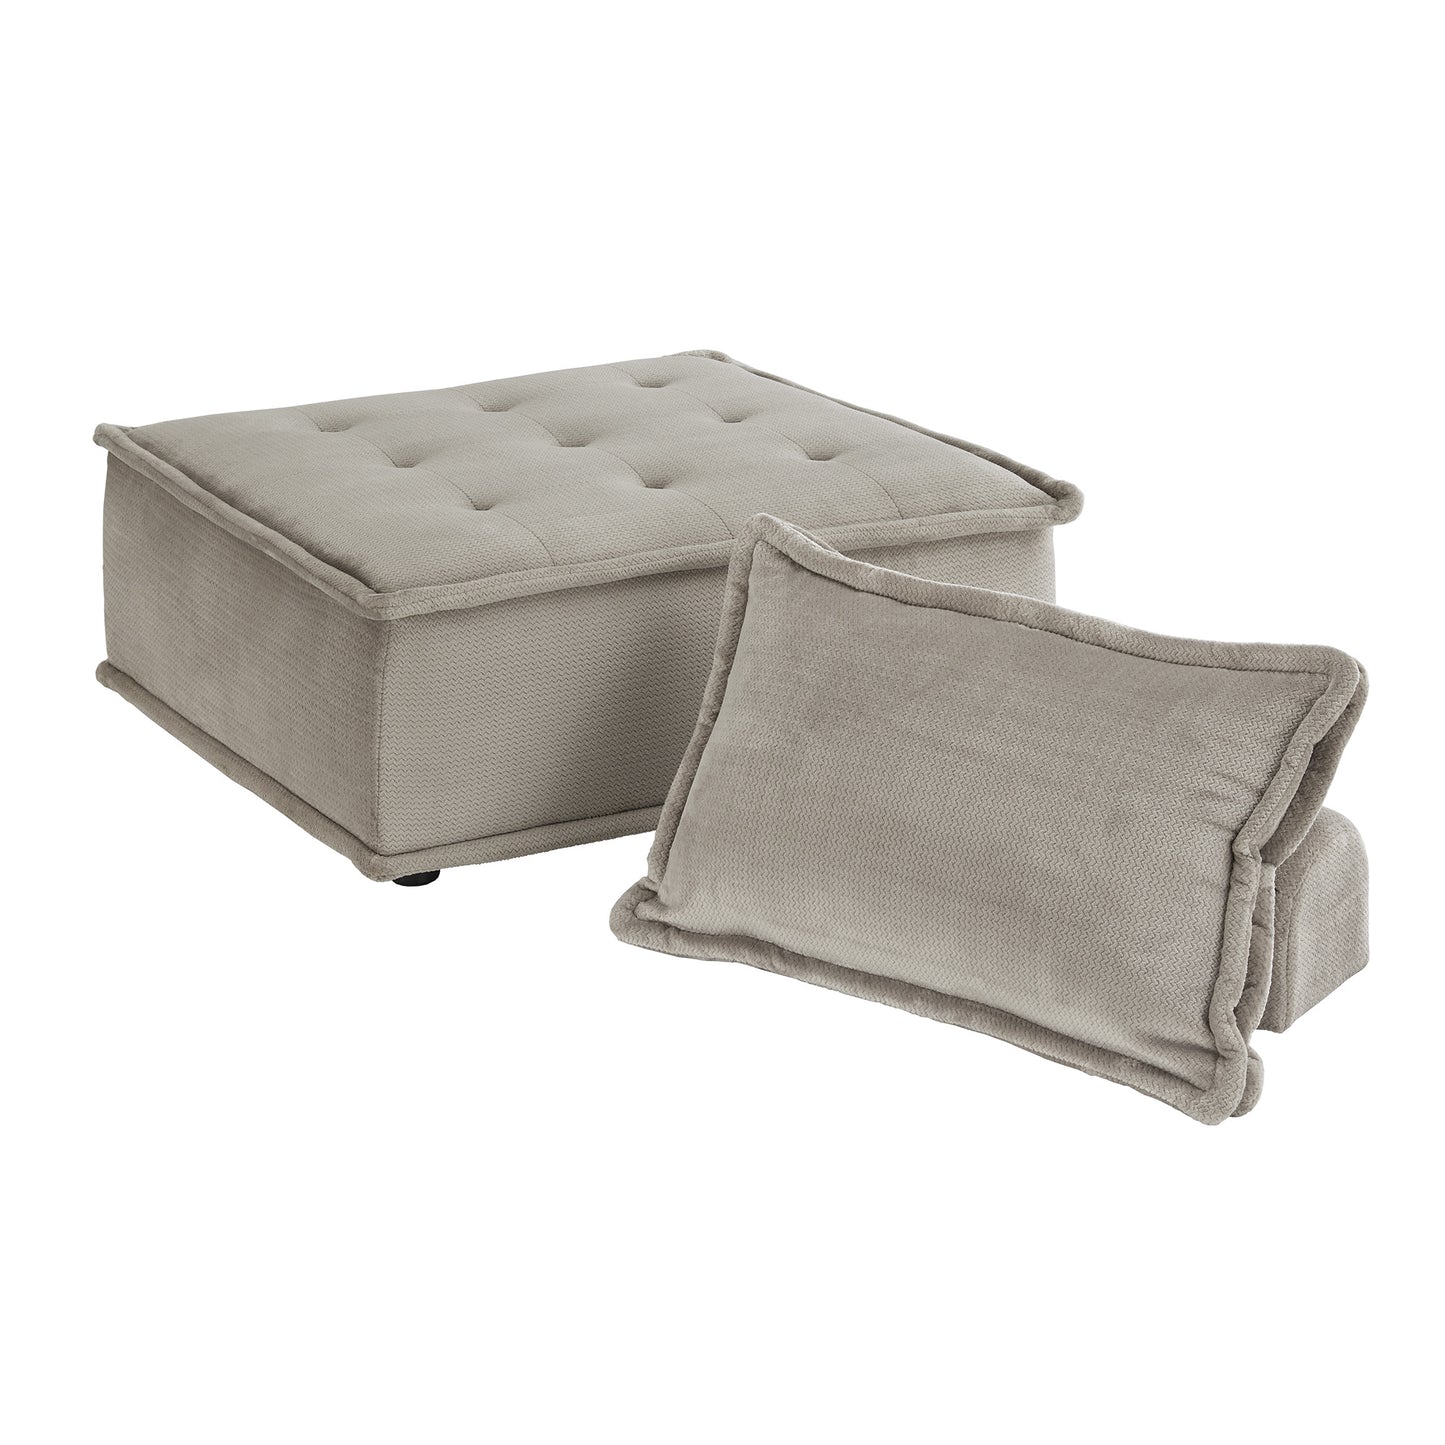 Velvet Tufted Modular Accent Chair with Pillow Back - Grey